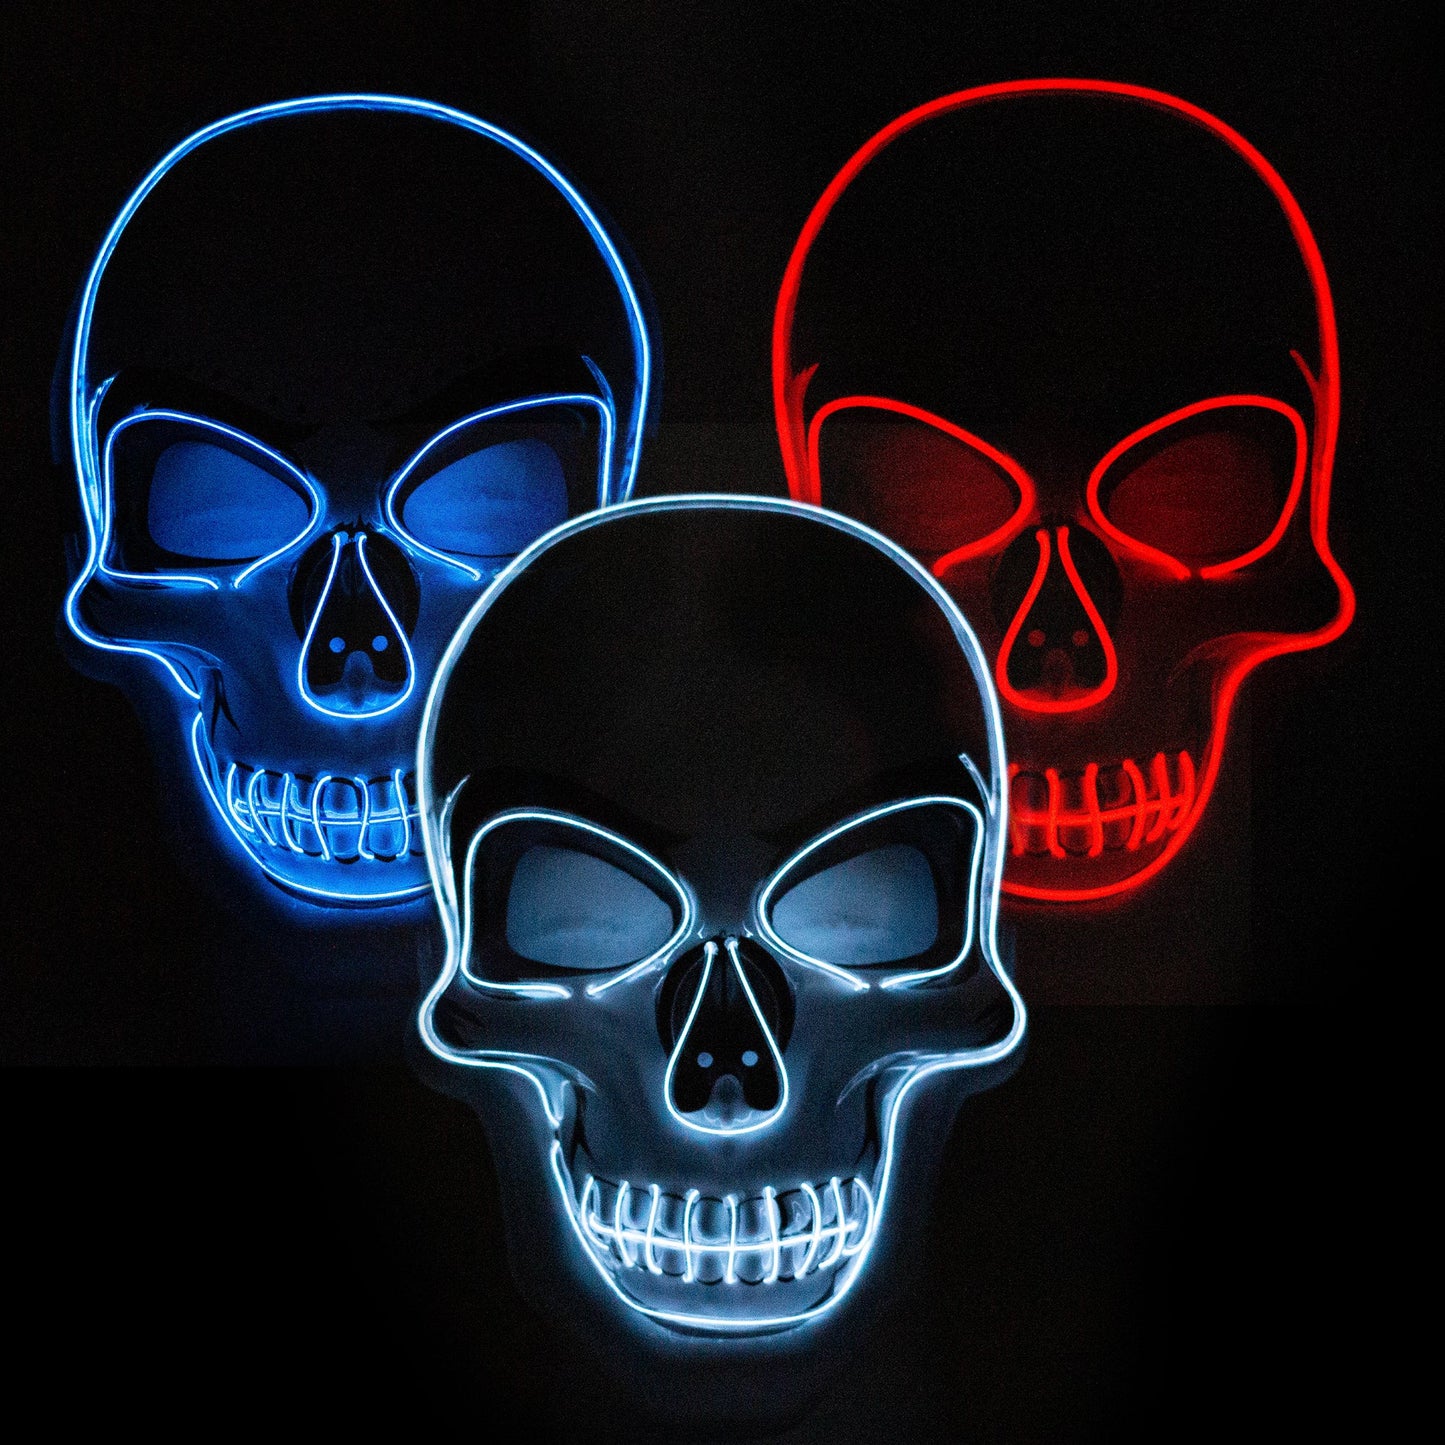 LED Neon Skull Mask for party or Halloween Costume_0